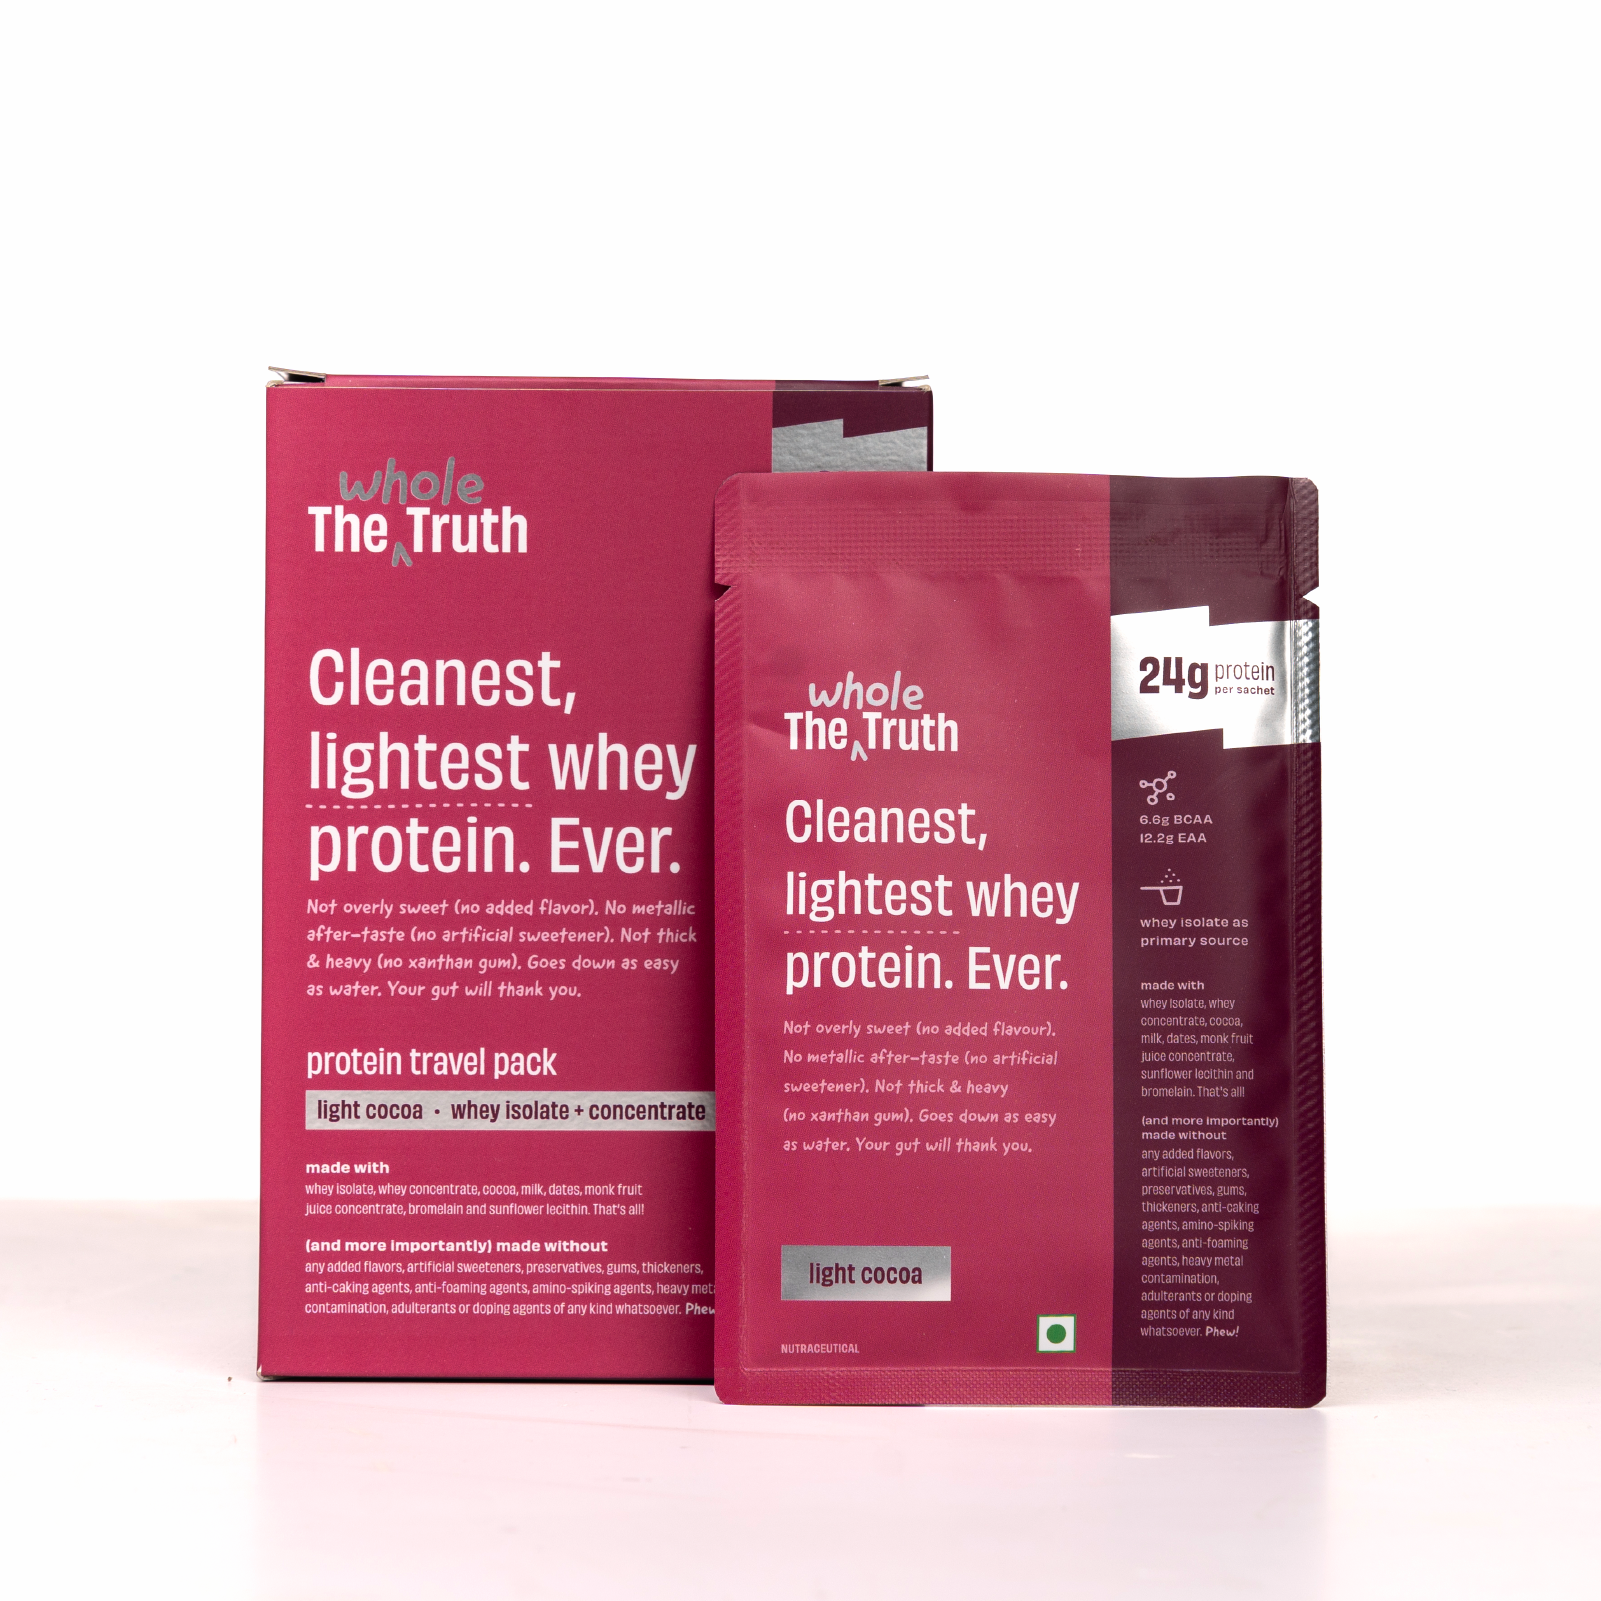 The Whole Truth Whey Protein Isolate+Concentrate | Light Cocoa 210g (Pack of 6) | 24g Protein/Sachet 6.6g BCAA | 100% Authentic & No Adulteration | Clean, Light & Easy to Digest | Sample & Travel Pack